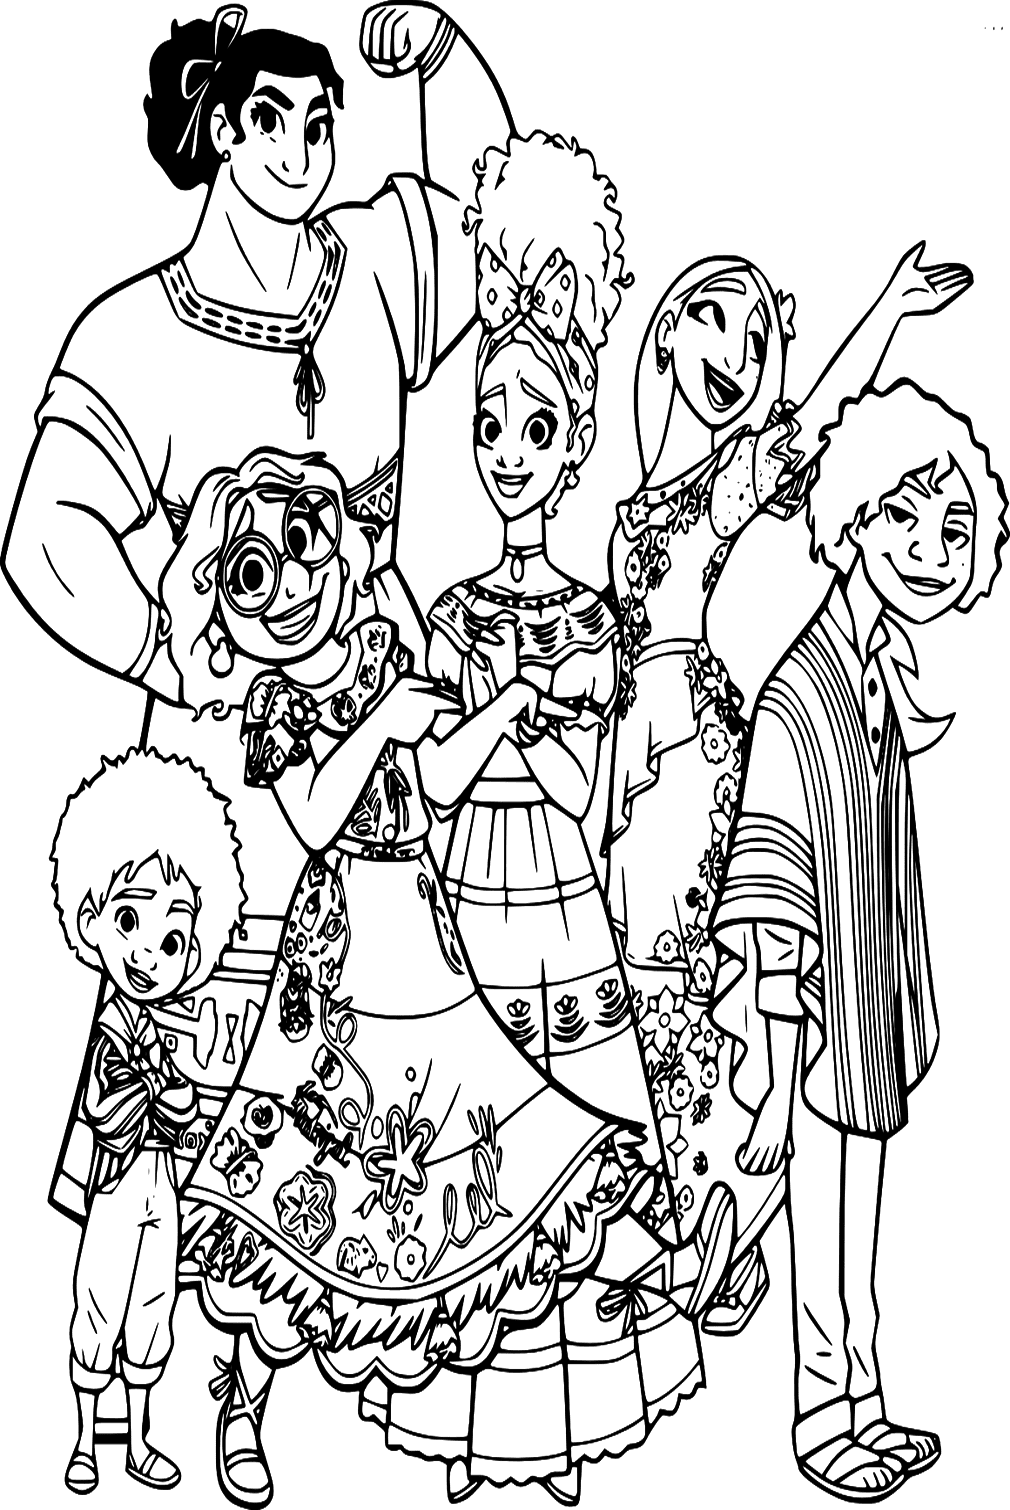 Encanto Family Coloring Page